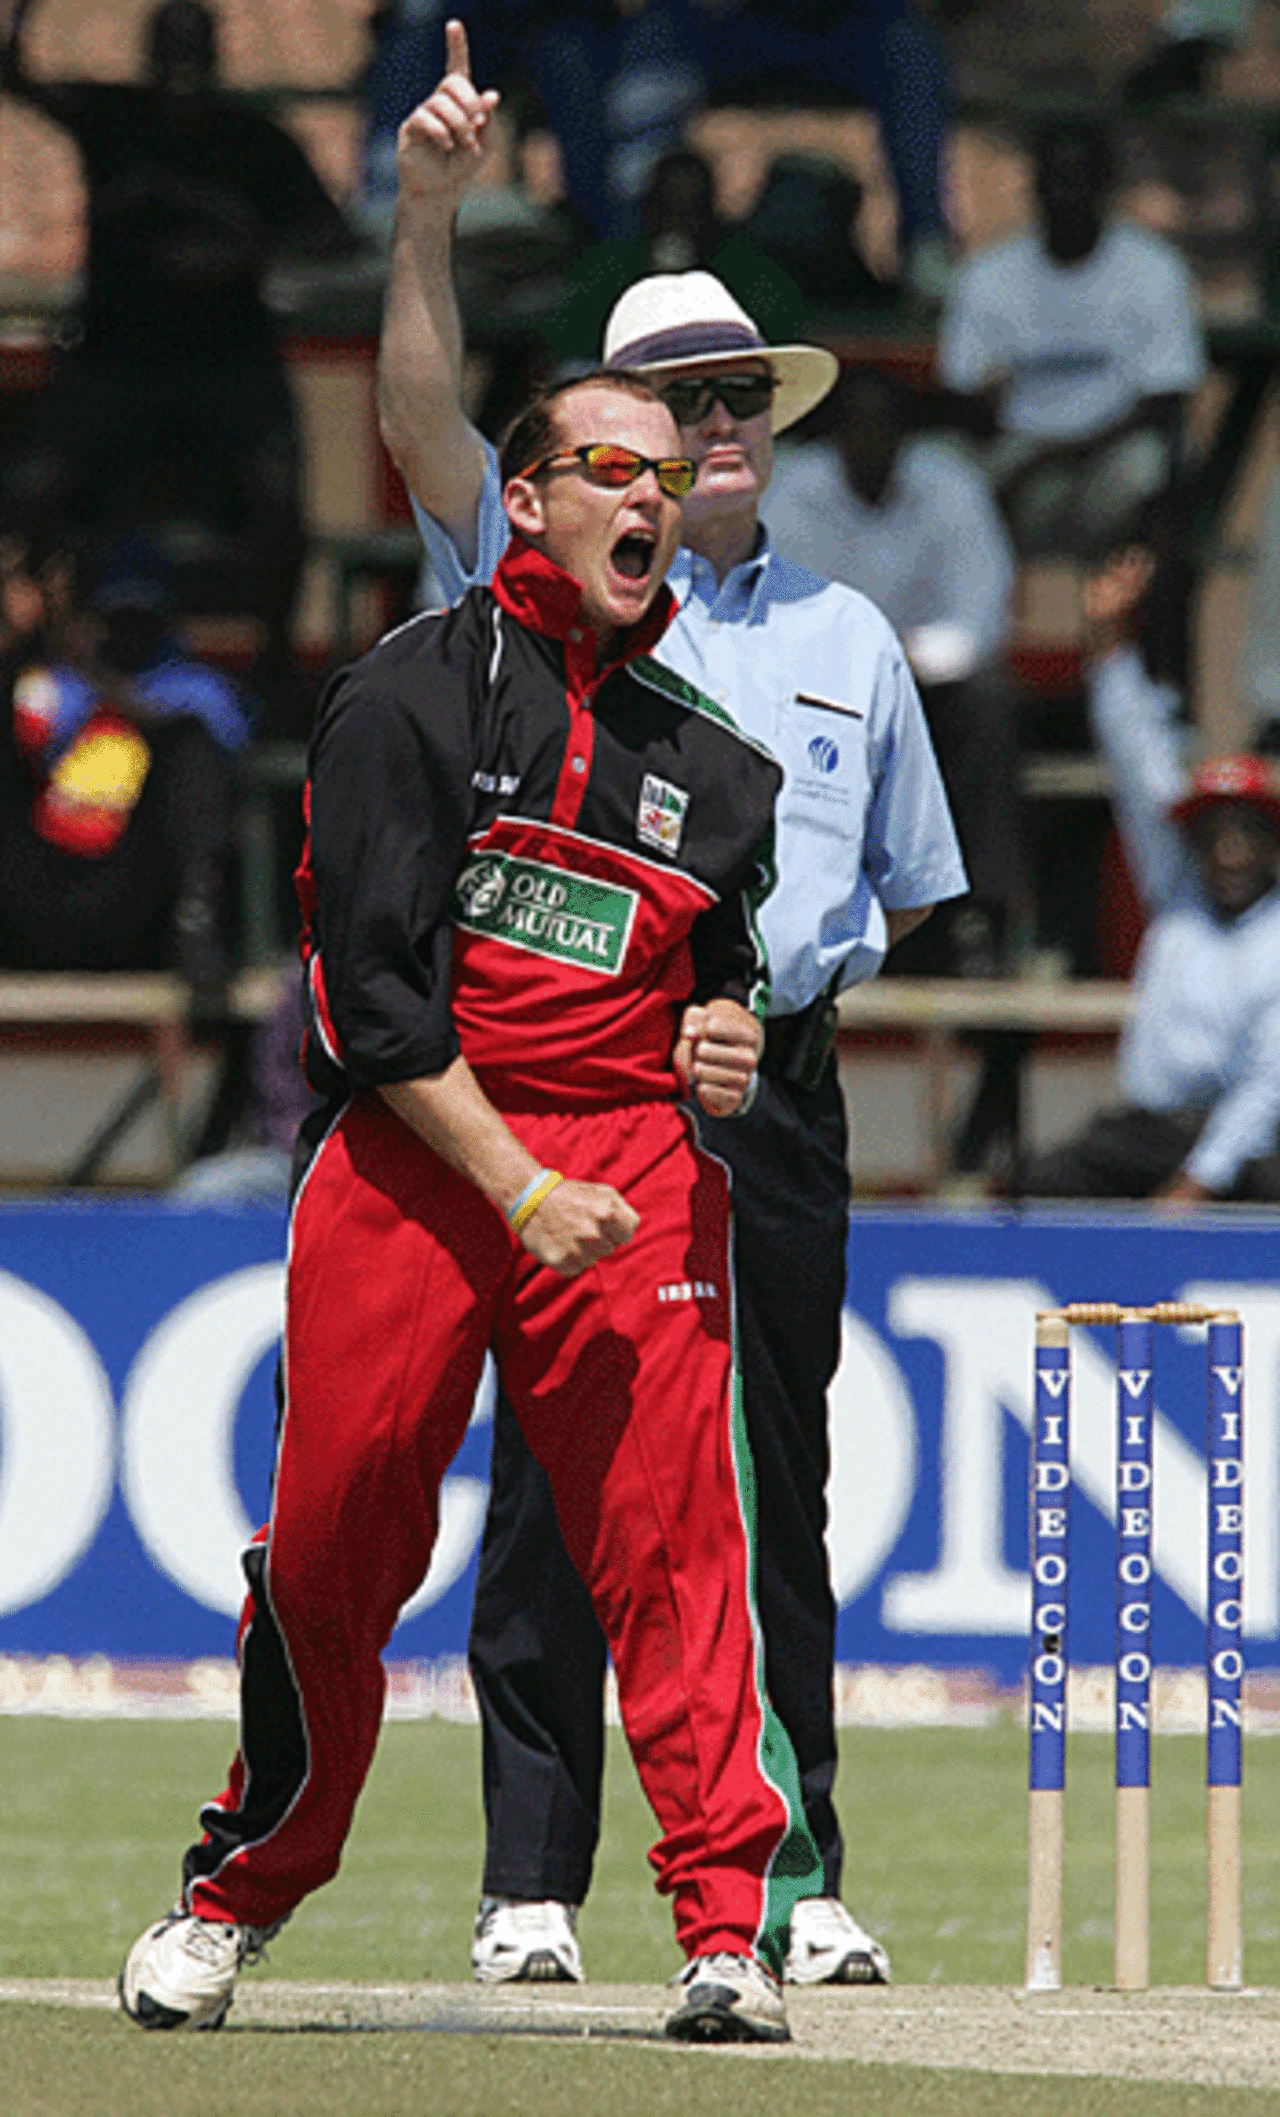 Gaving Ewing vents his emotions after dismissing Brendon McCullum, Zimbabwe v New Zealand, Harare, August 31, 2005